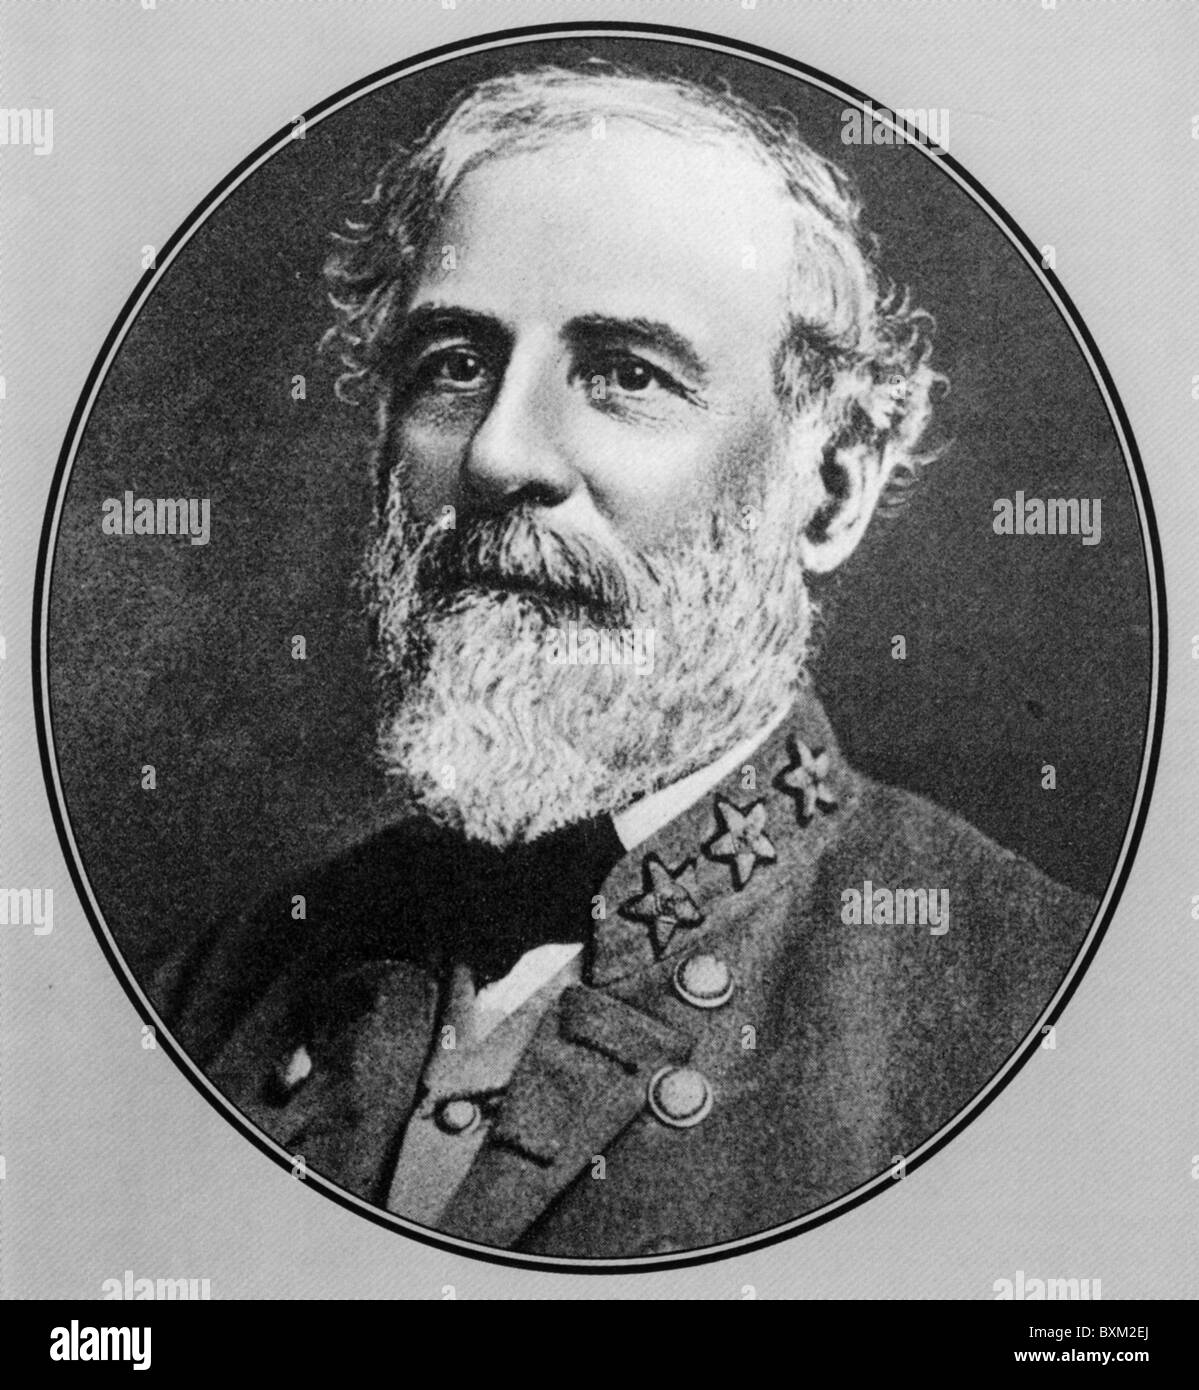 ROBERT E LEE (1807-1870) commanding general of the Confederate Army during  the American Civil War Stock Photo - Alamy